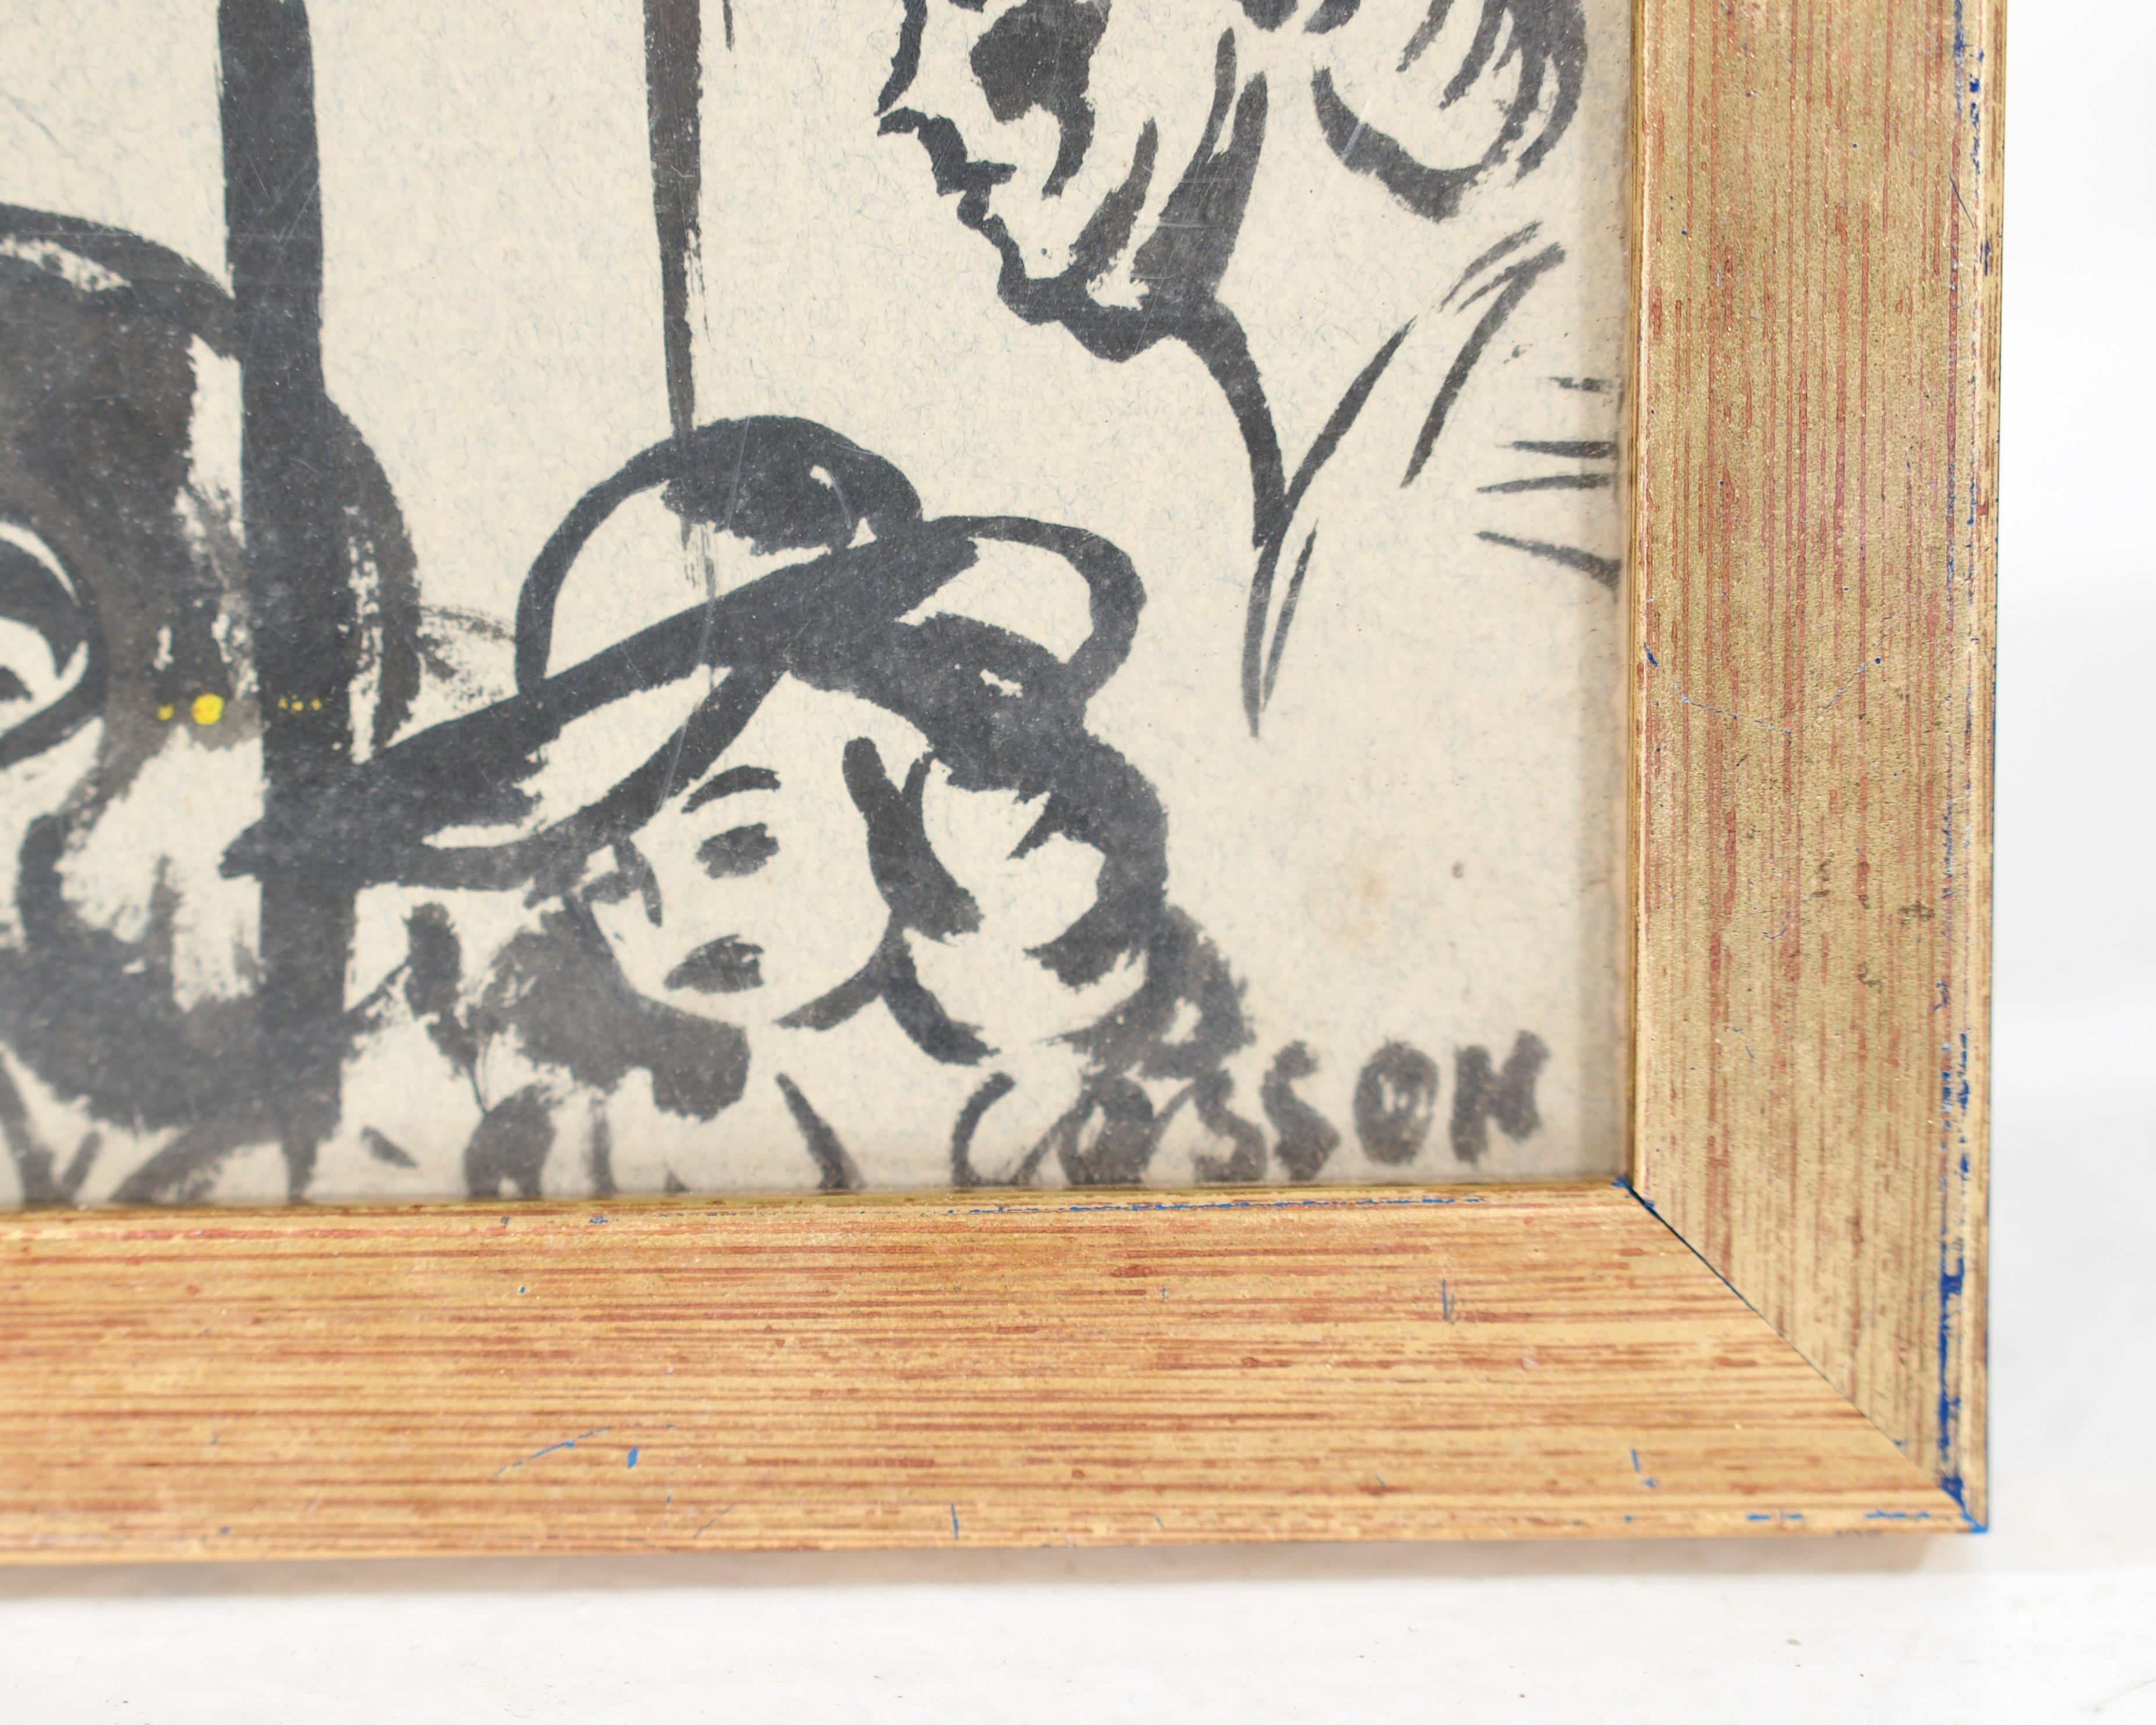 Fine gauche, probably by a Germanexpressionist, signed “casson”, circa 1930 For Sale 1